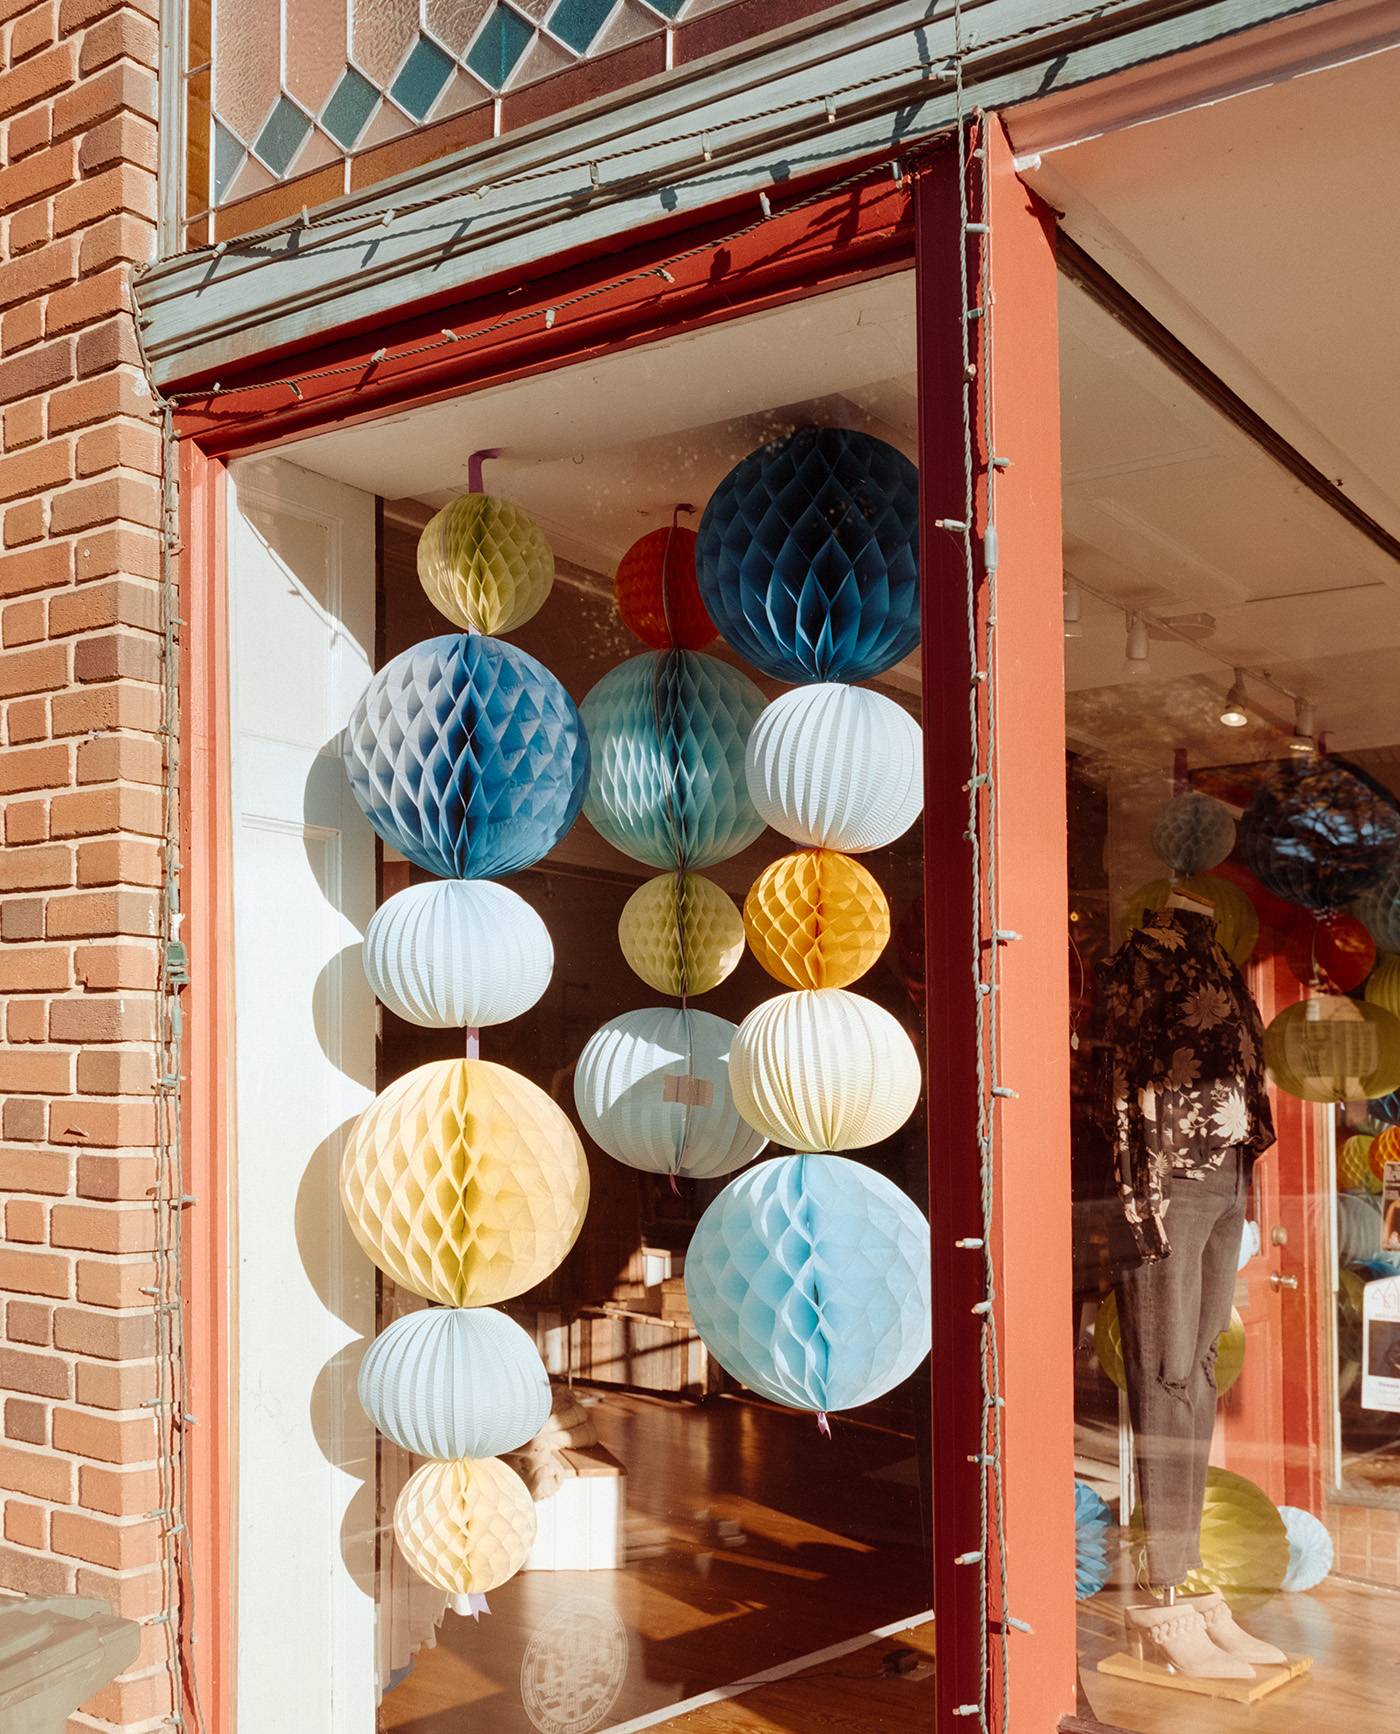 A medium format color film photo of hanging paper globes in a shop showcase window in the bright early morning light.